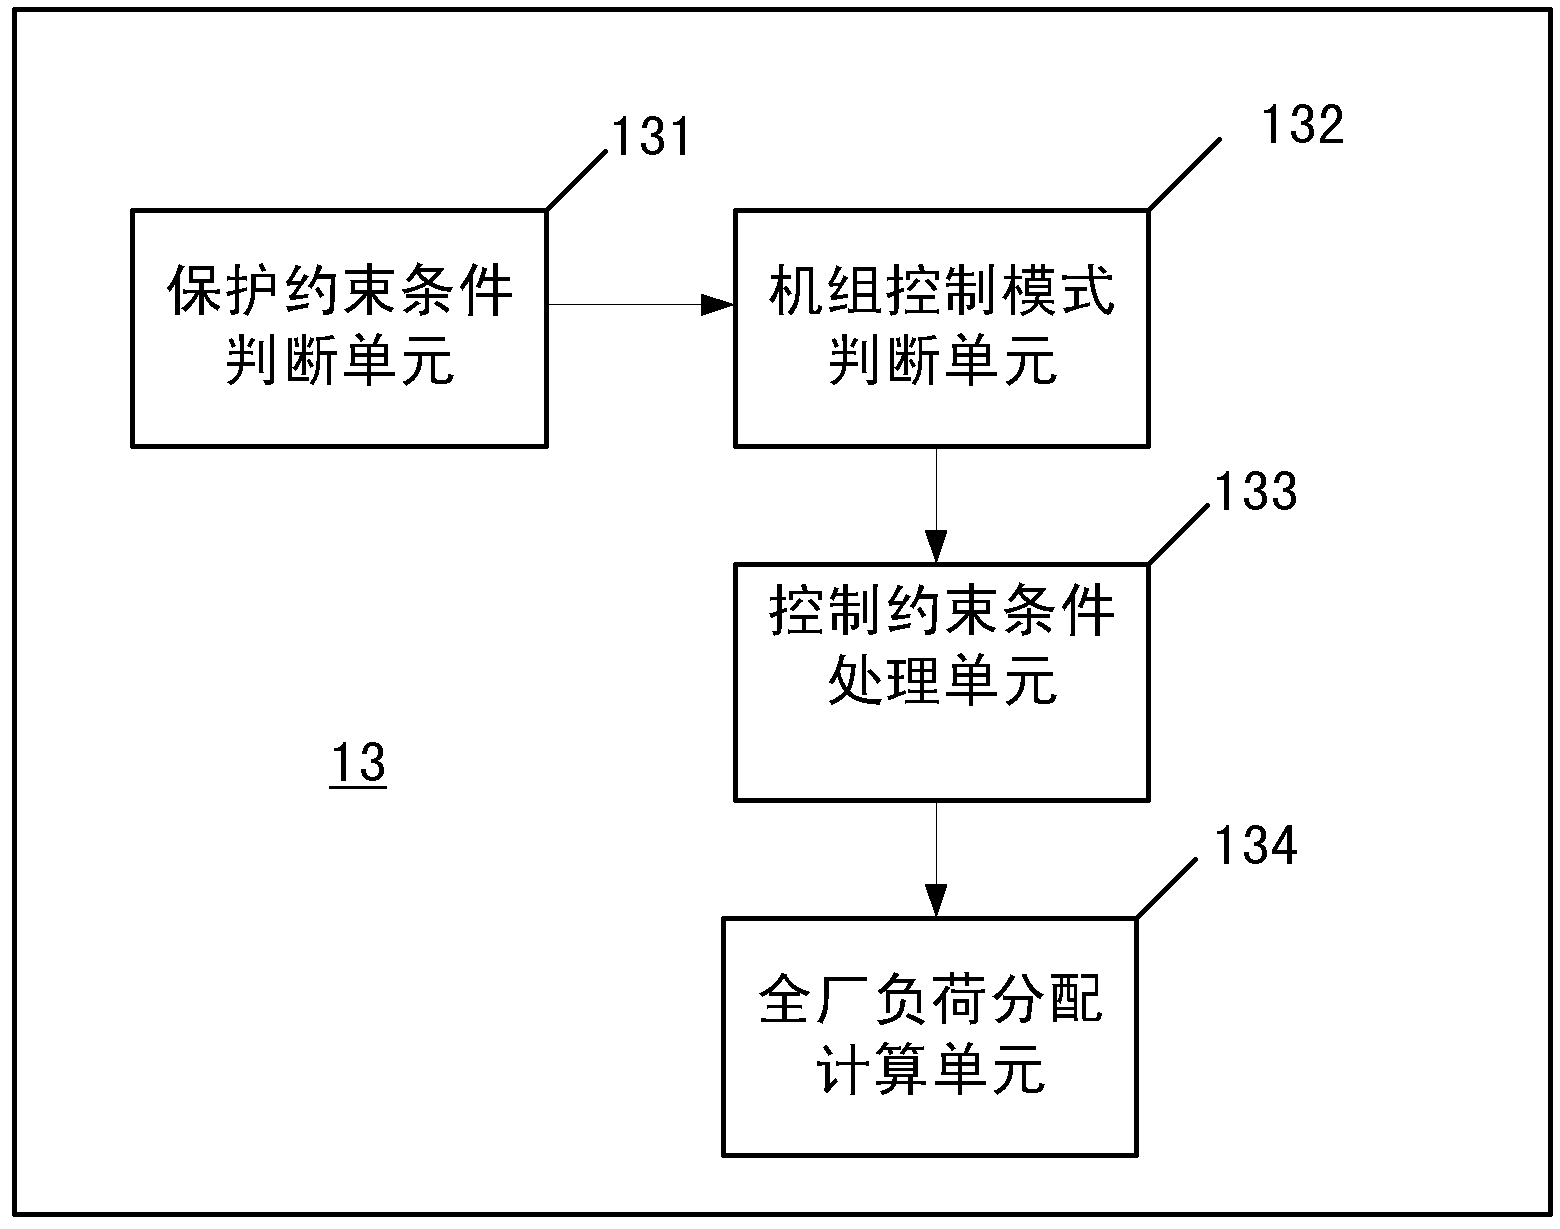 Electrical telemechanical host with plant-level automatic power generation function